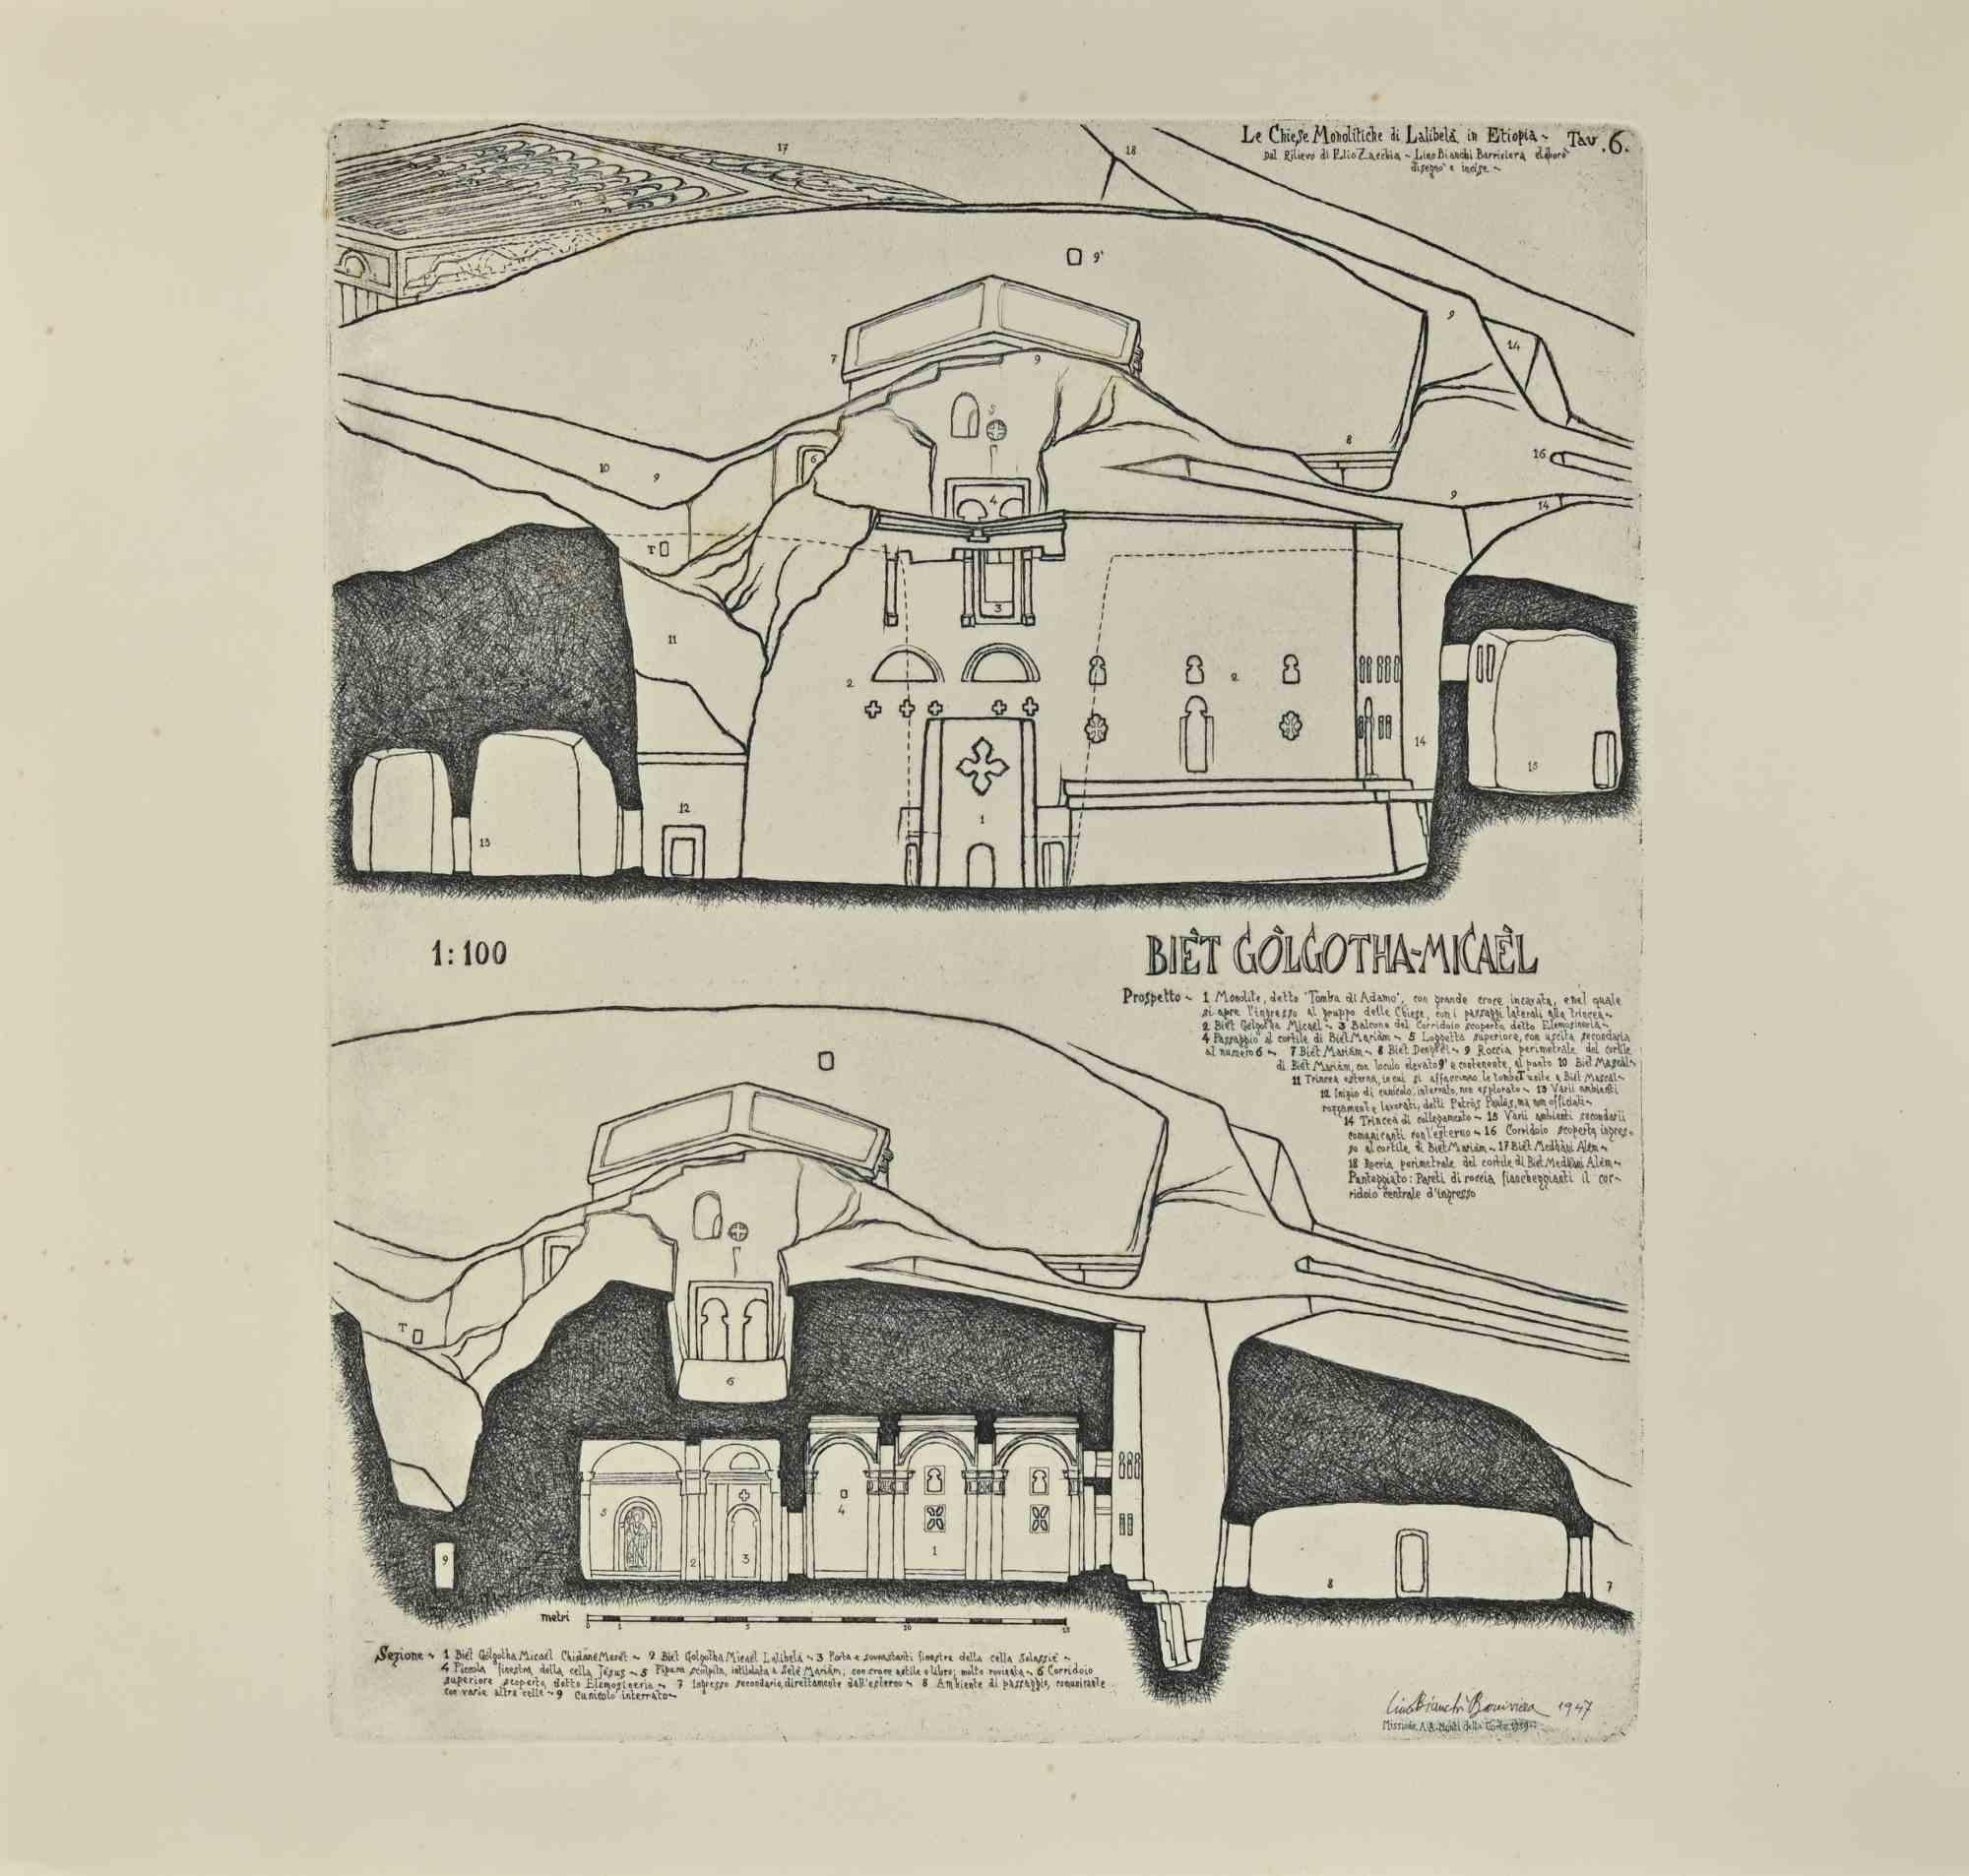 Adam's Tomb and Biet Golgotha-Micael - Elevation and sections is a modern artwork realized by Lino Bianchi Barriviera in 1947.

Black and white etching.

Signed and dated on plate.

Plate n.6 (as reported on the higher margin).

The artwork is from